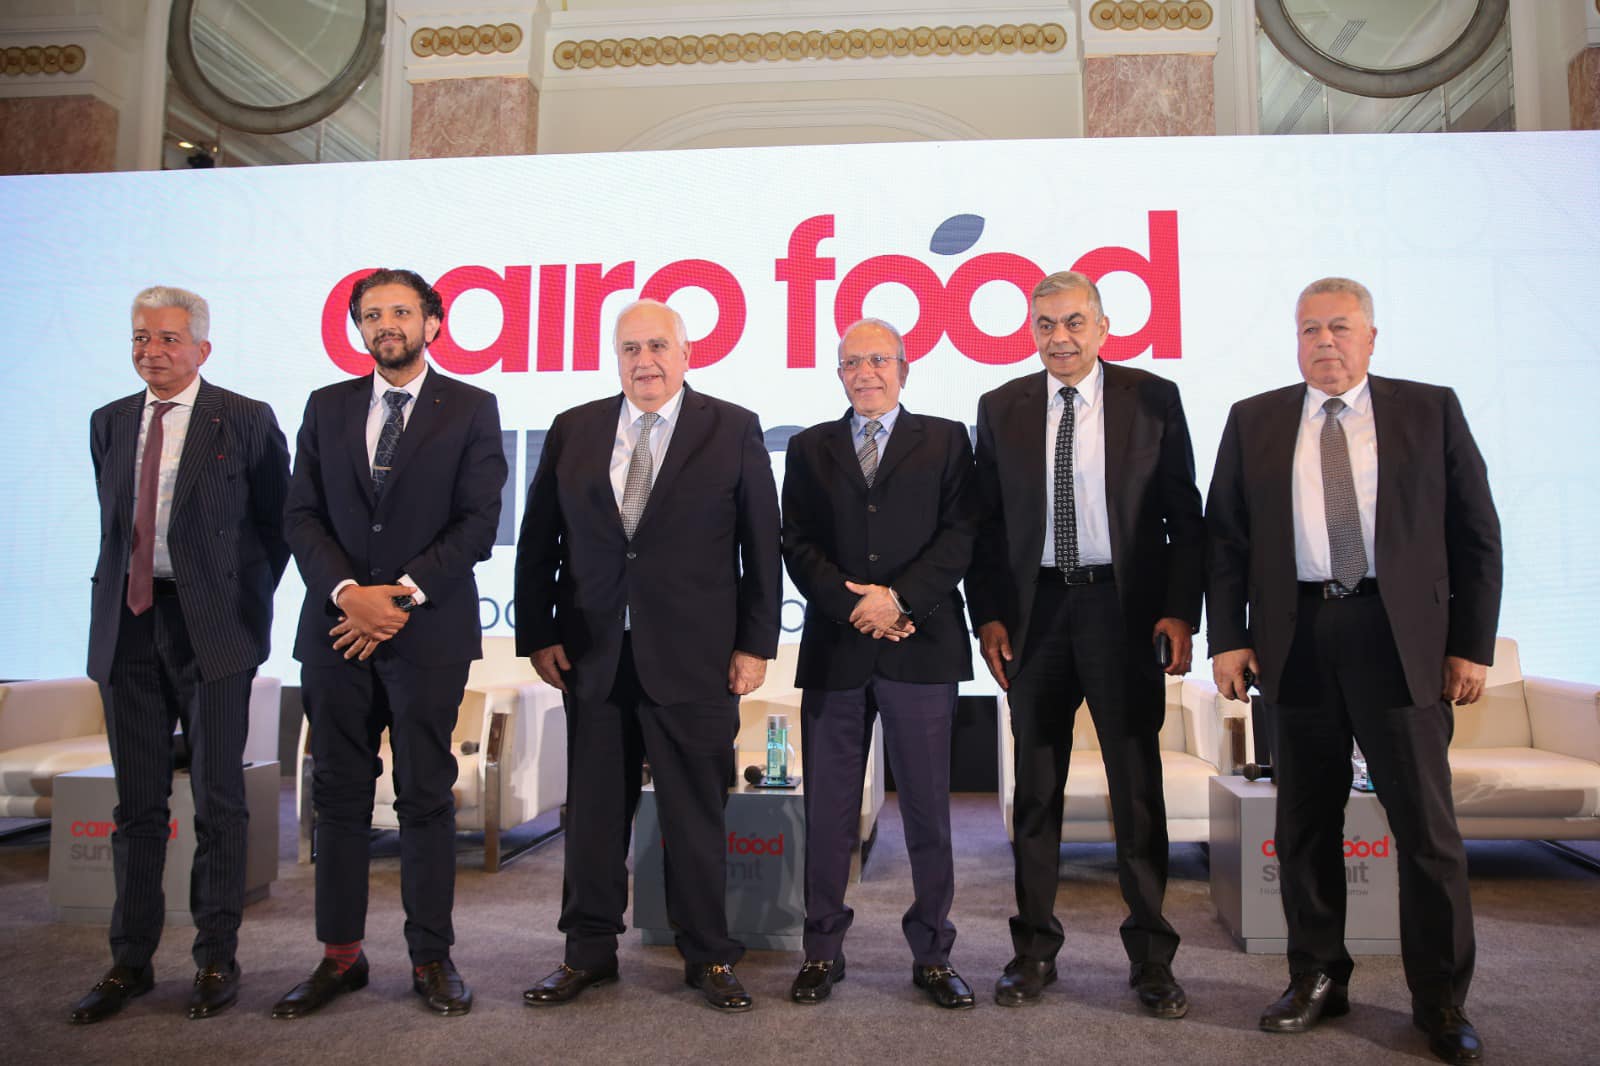 The 2nd session of the inaugural Cairo Food Summit